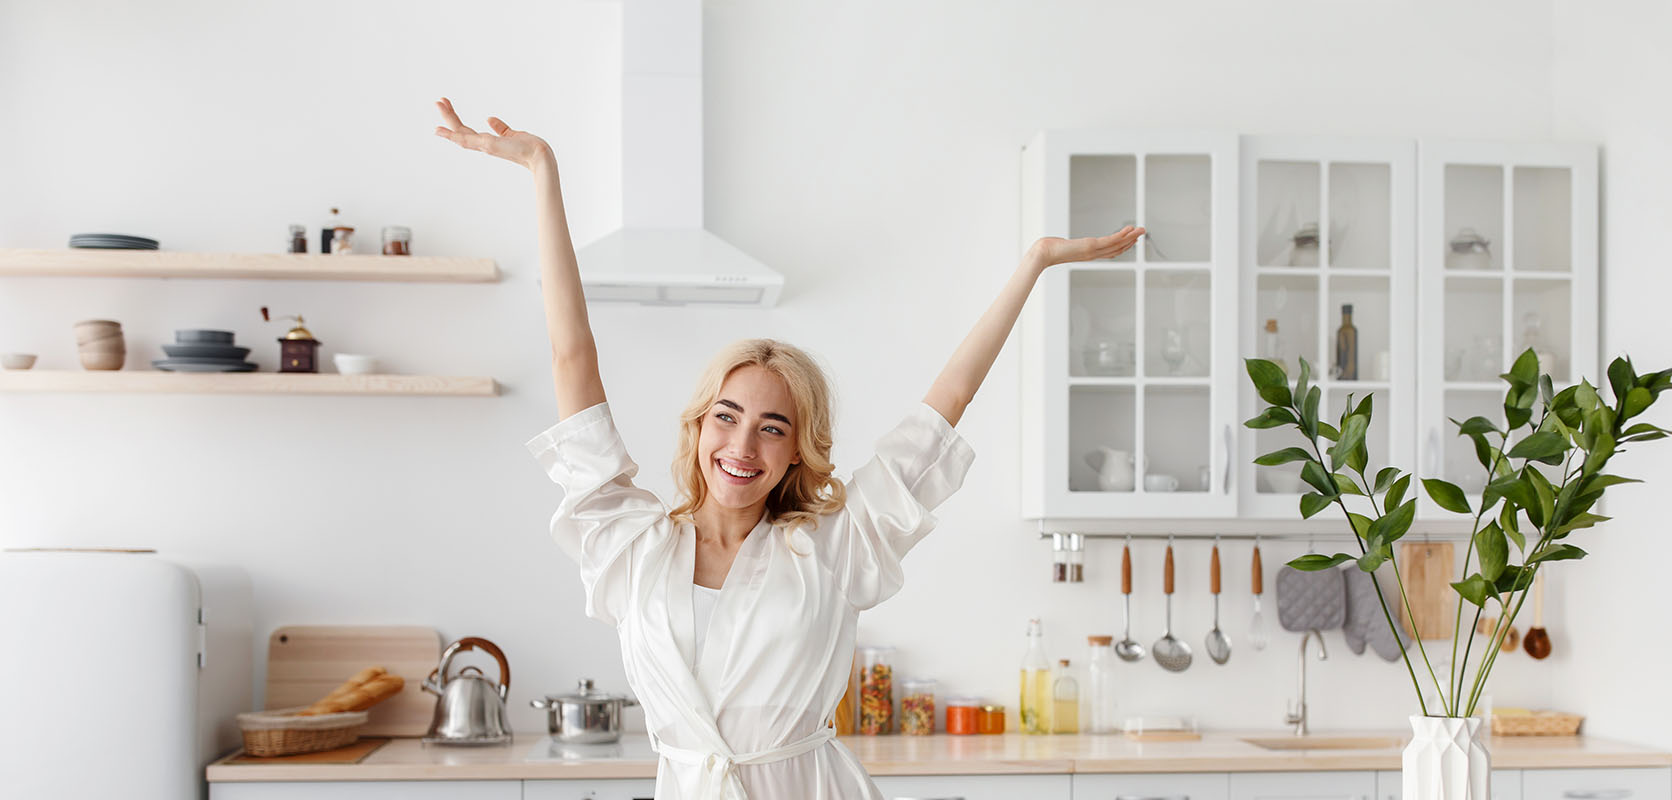 Happy woman with her arms raised celebrating life in her kitchen. Buy weed online in Canada from best online dispensary Low Price Bud.